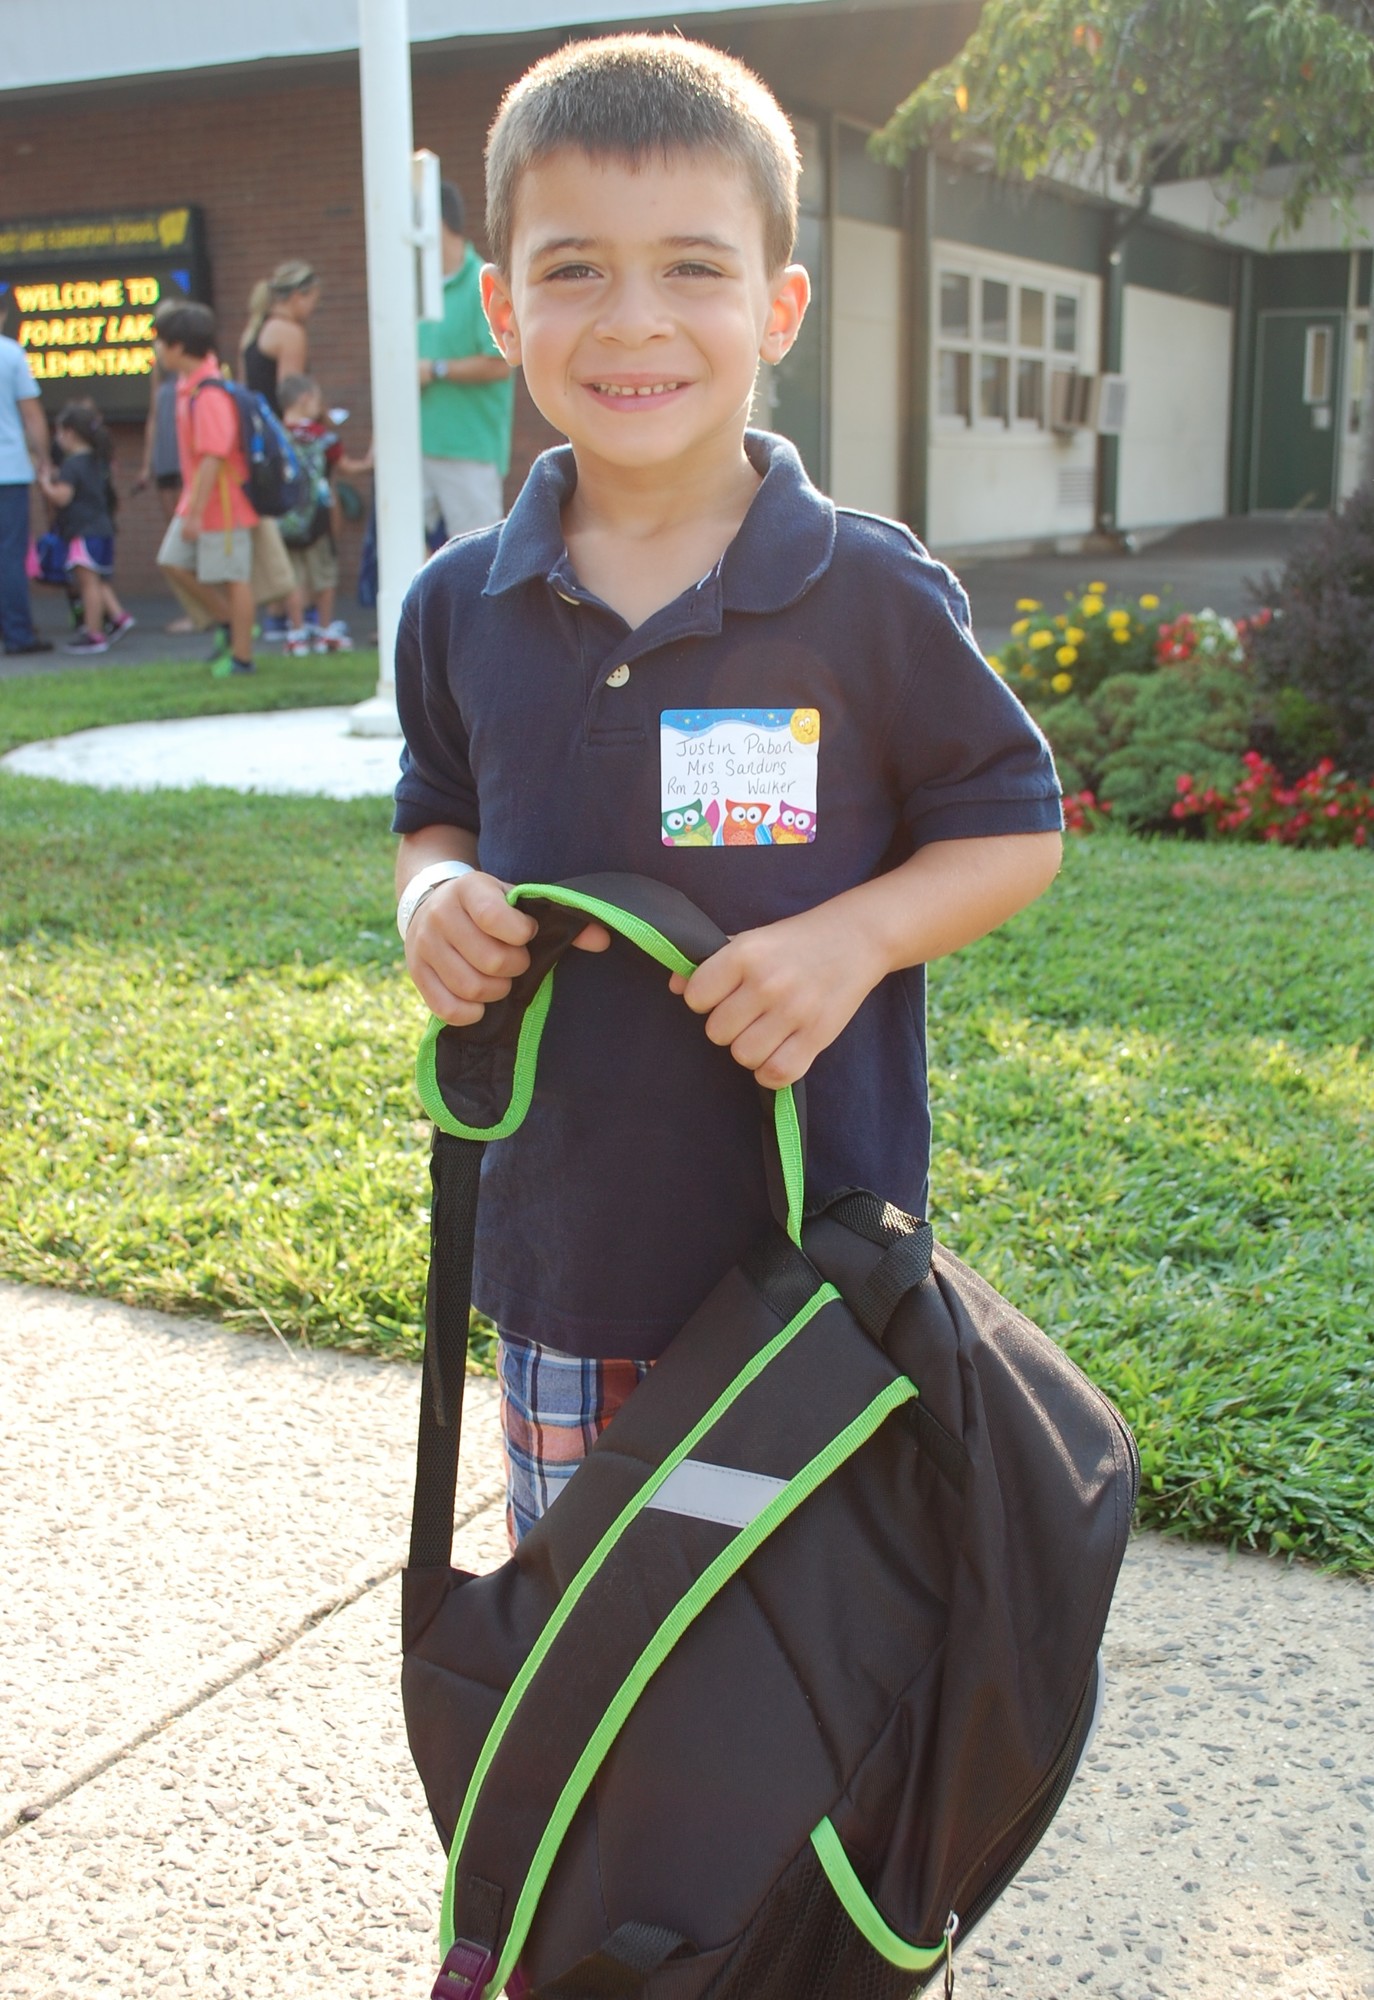 Justin Pabon started his first day of kindergarten at Forest Lake Elementary School.